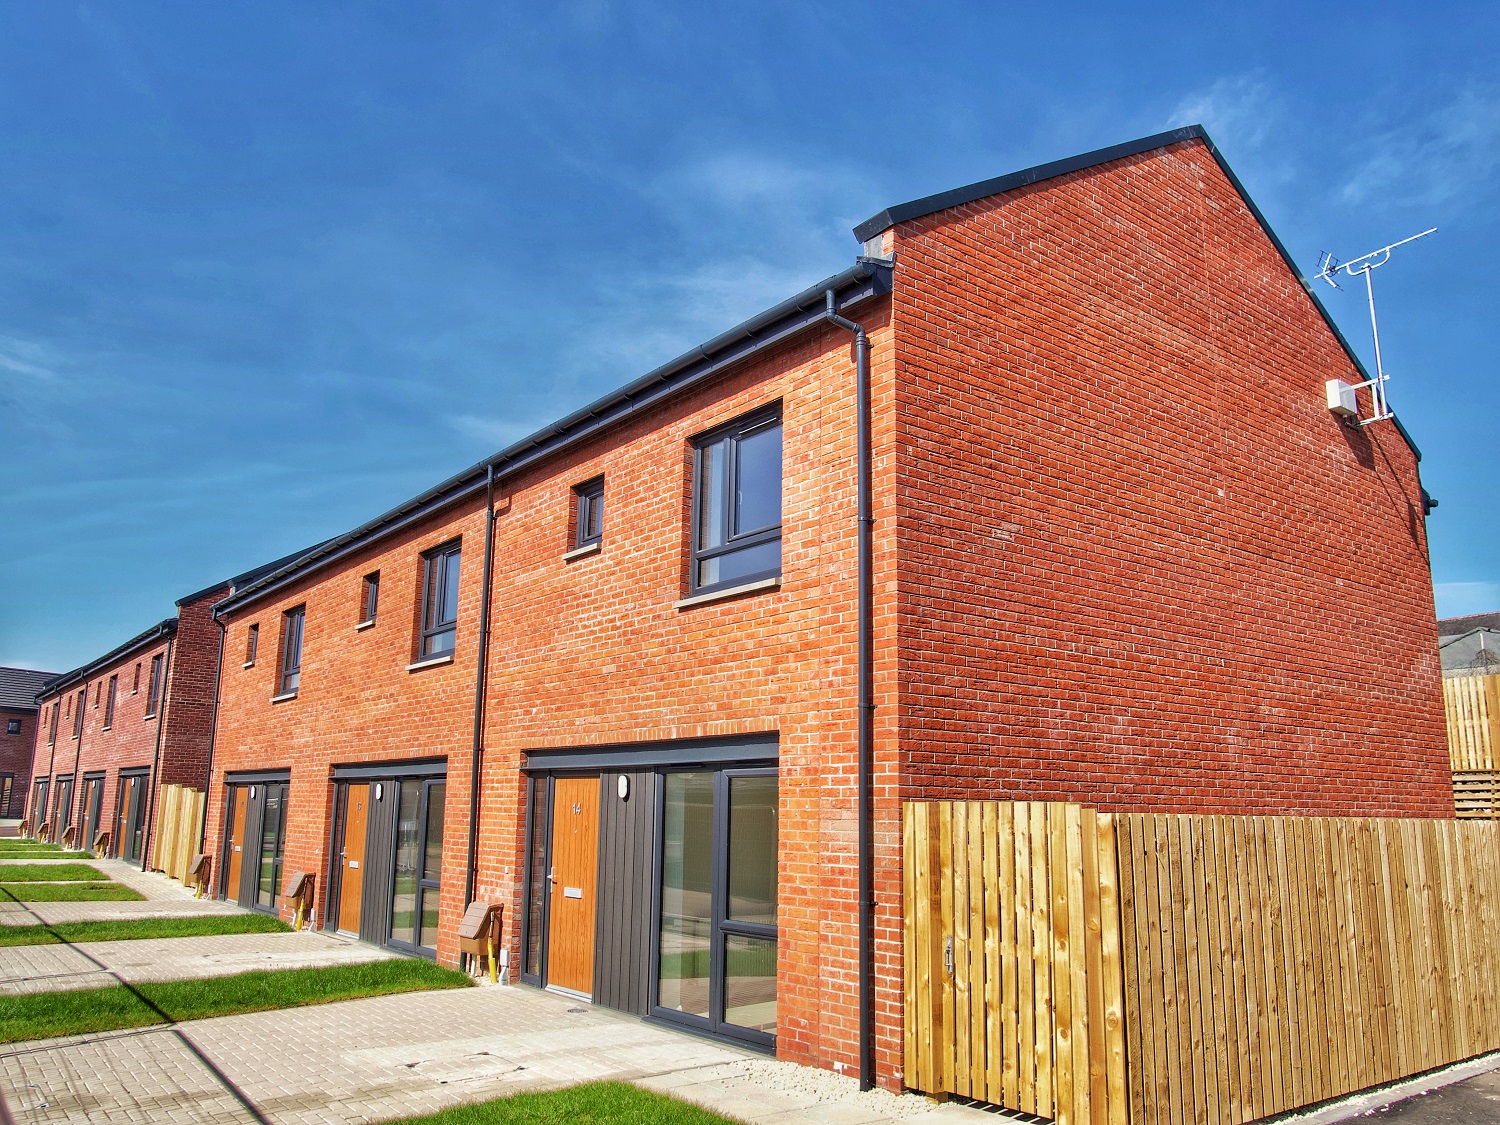 79 inclusive council homes completed in Kilwinning